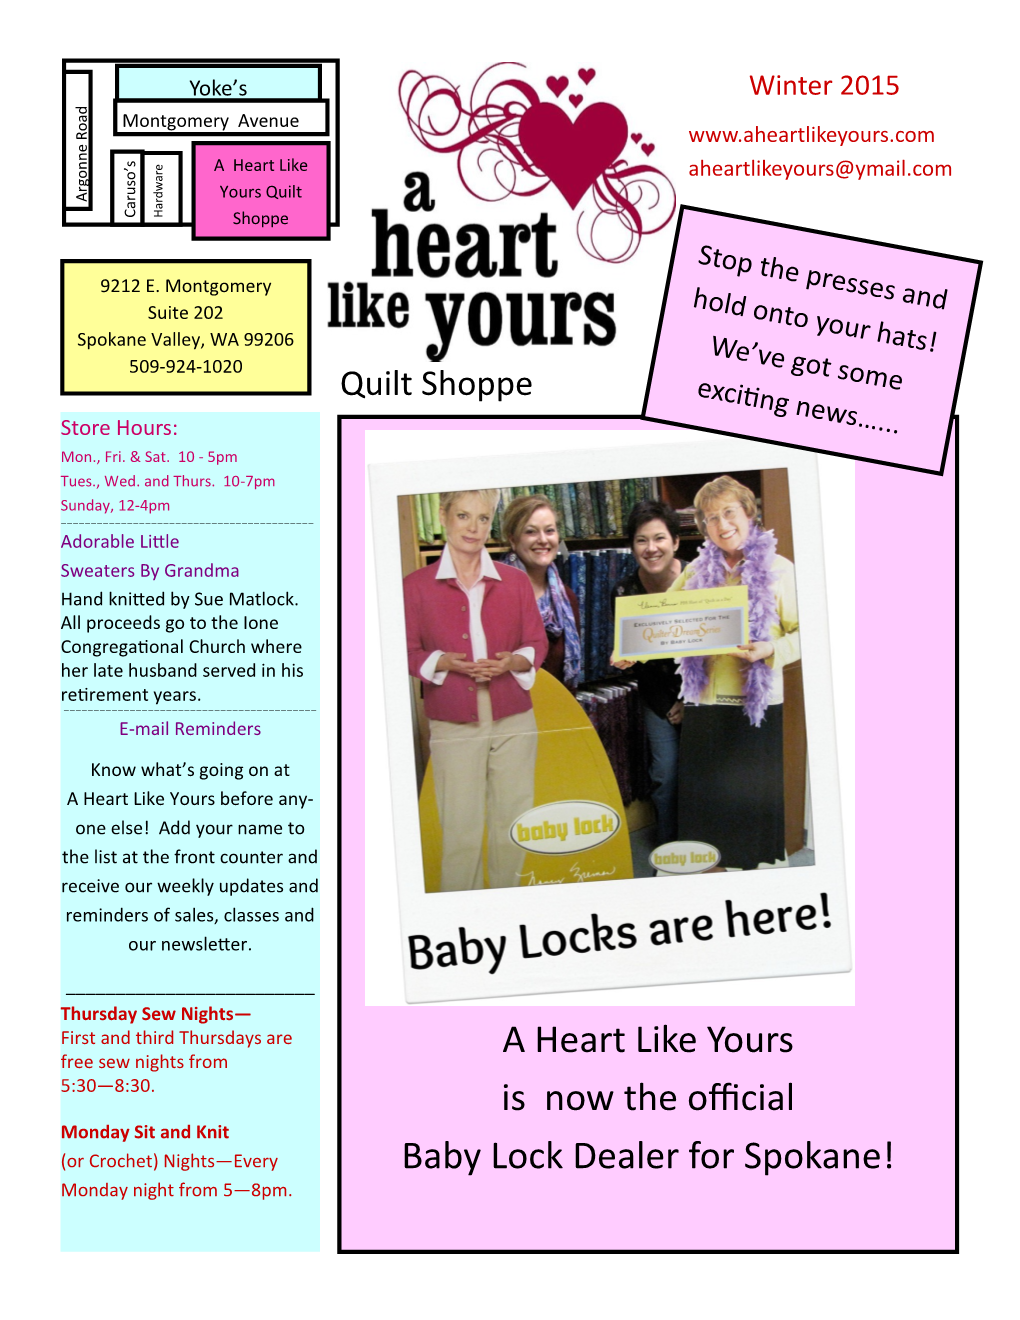 A Heart Like Yours Is Now the Official Baby Lock De